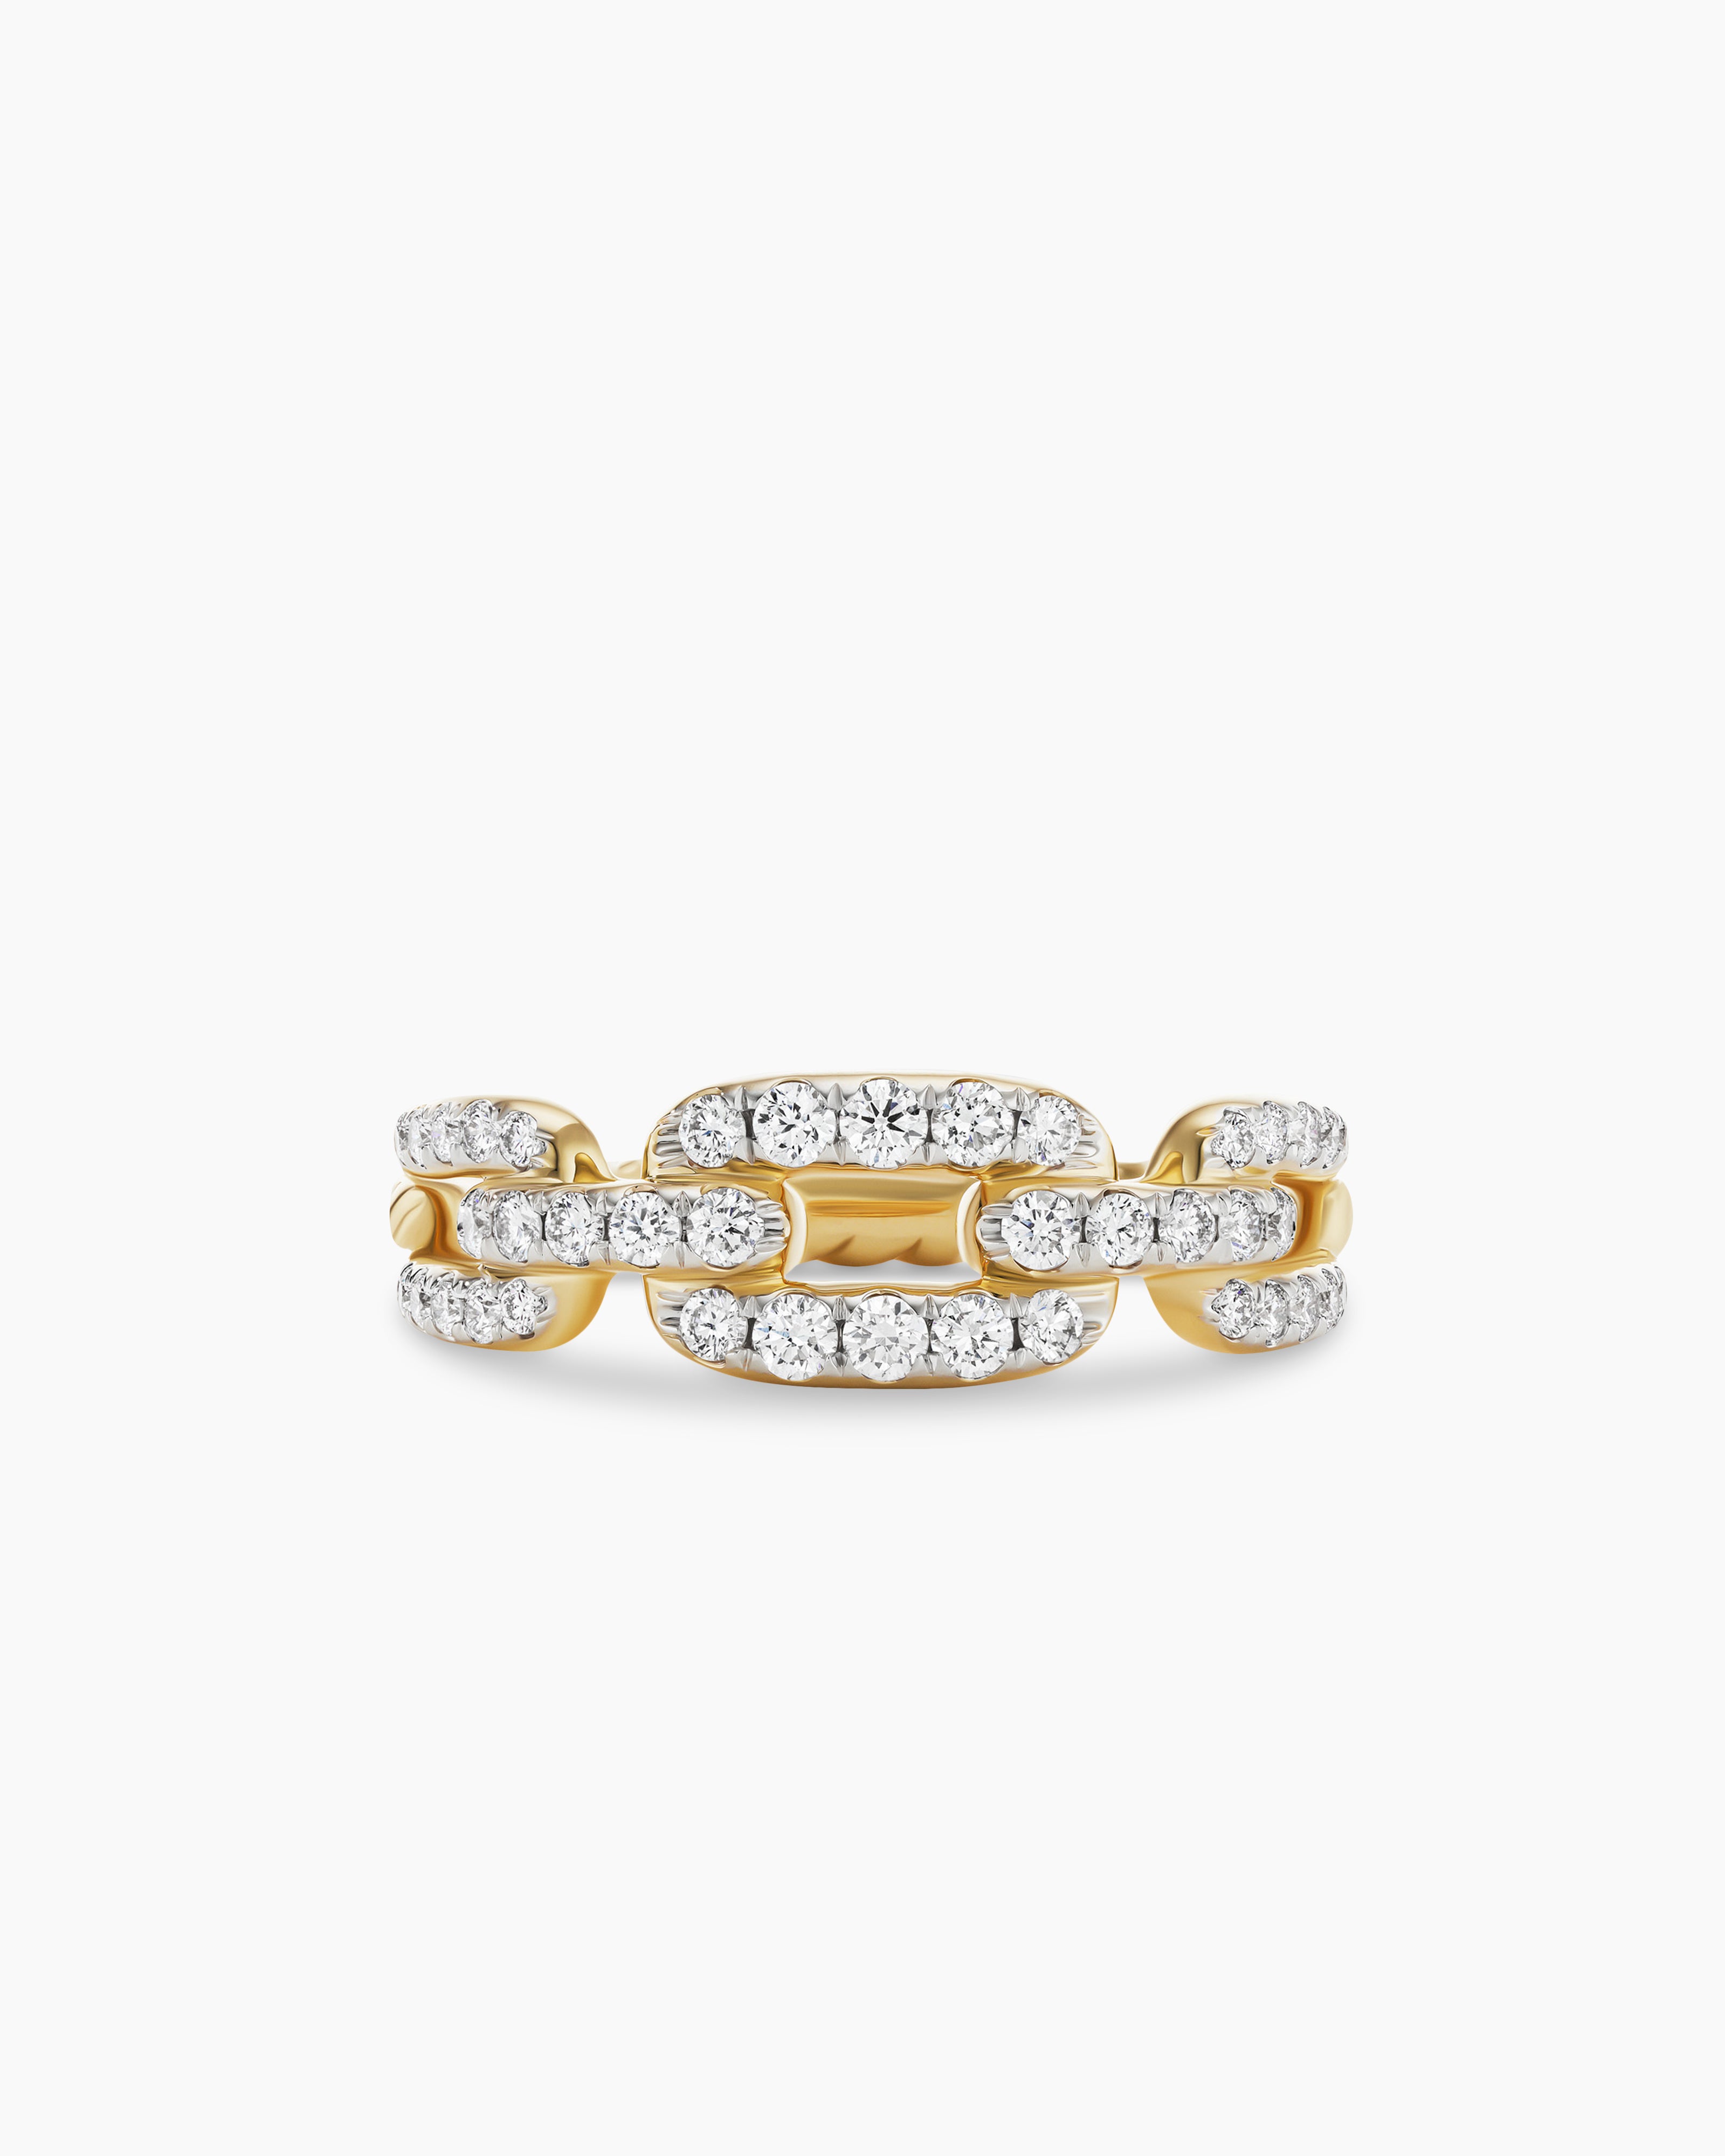 Stax Chain Link Ring in 18K Yellow Gold with Diamonds, 7mm | David